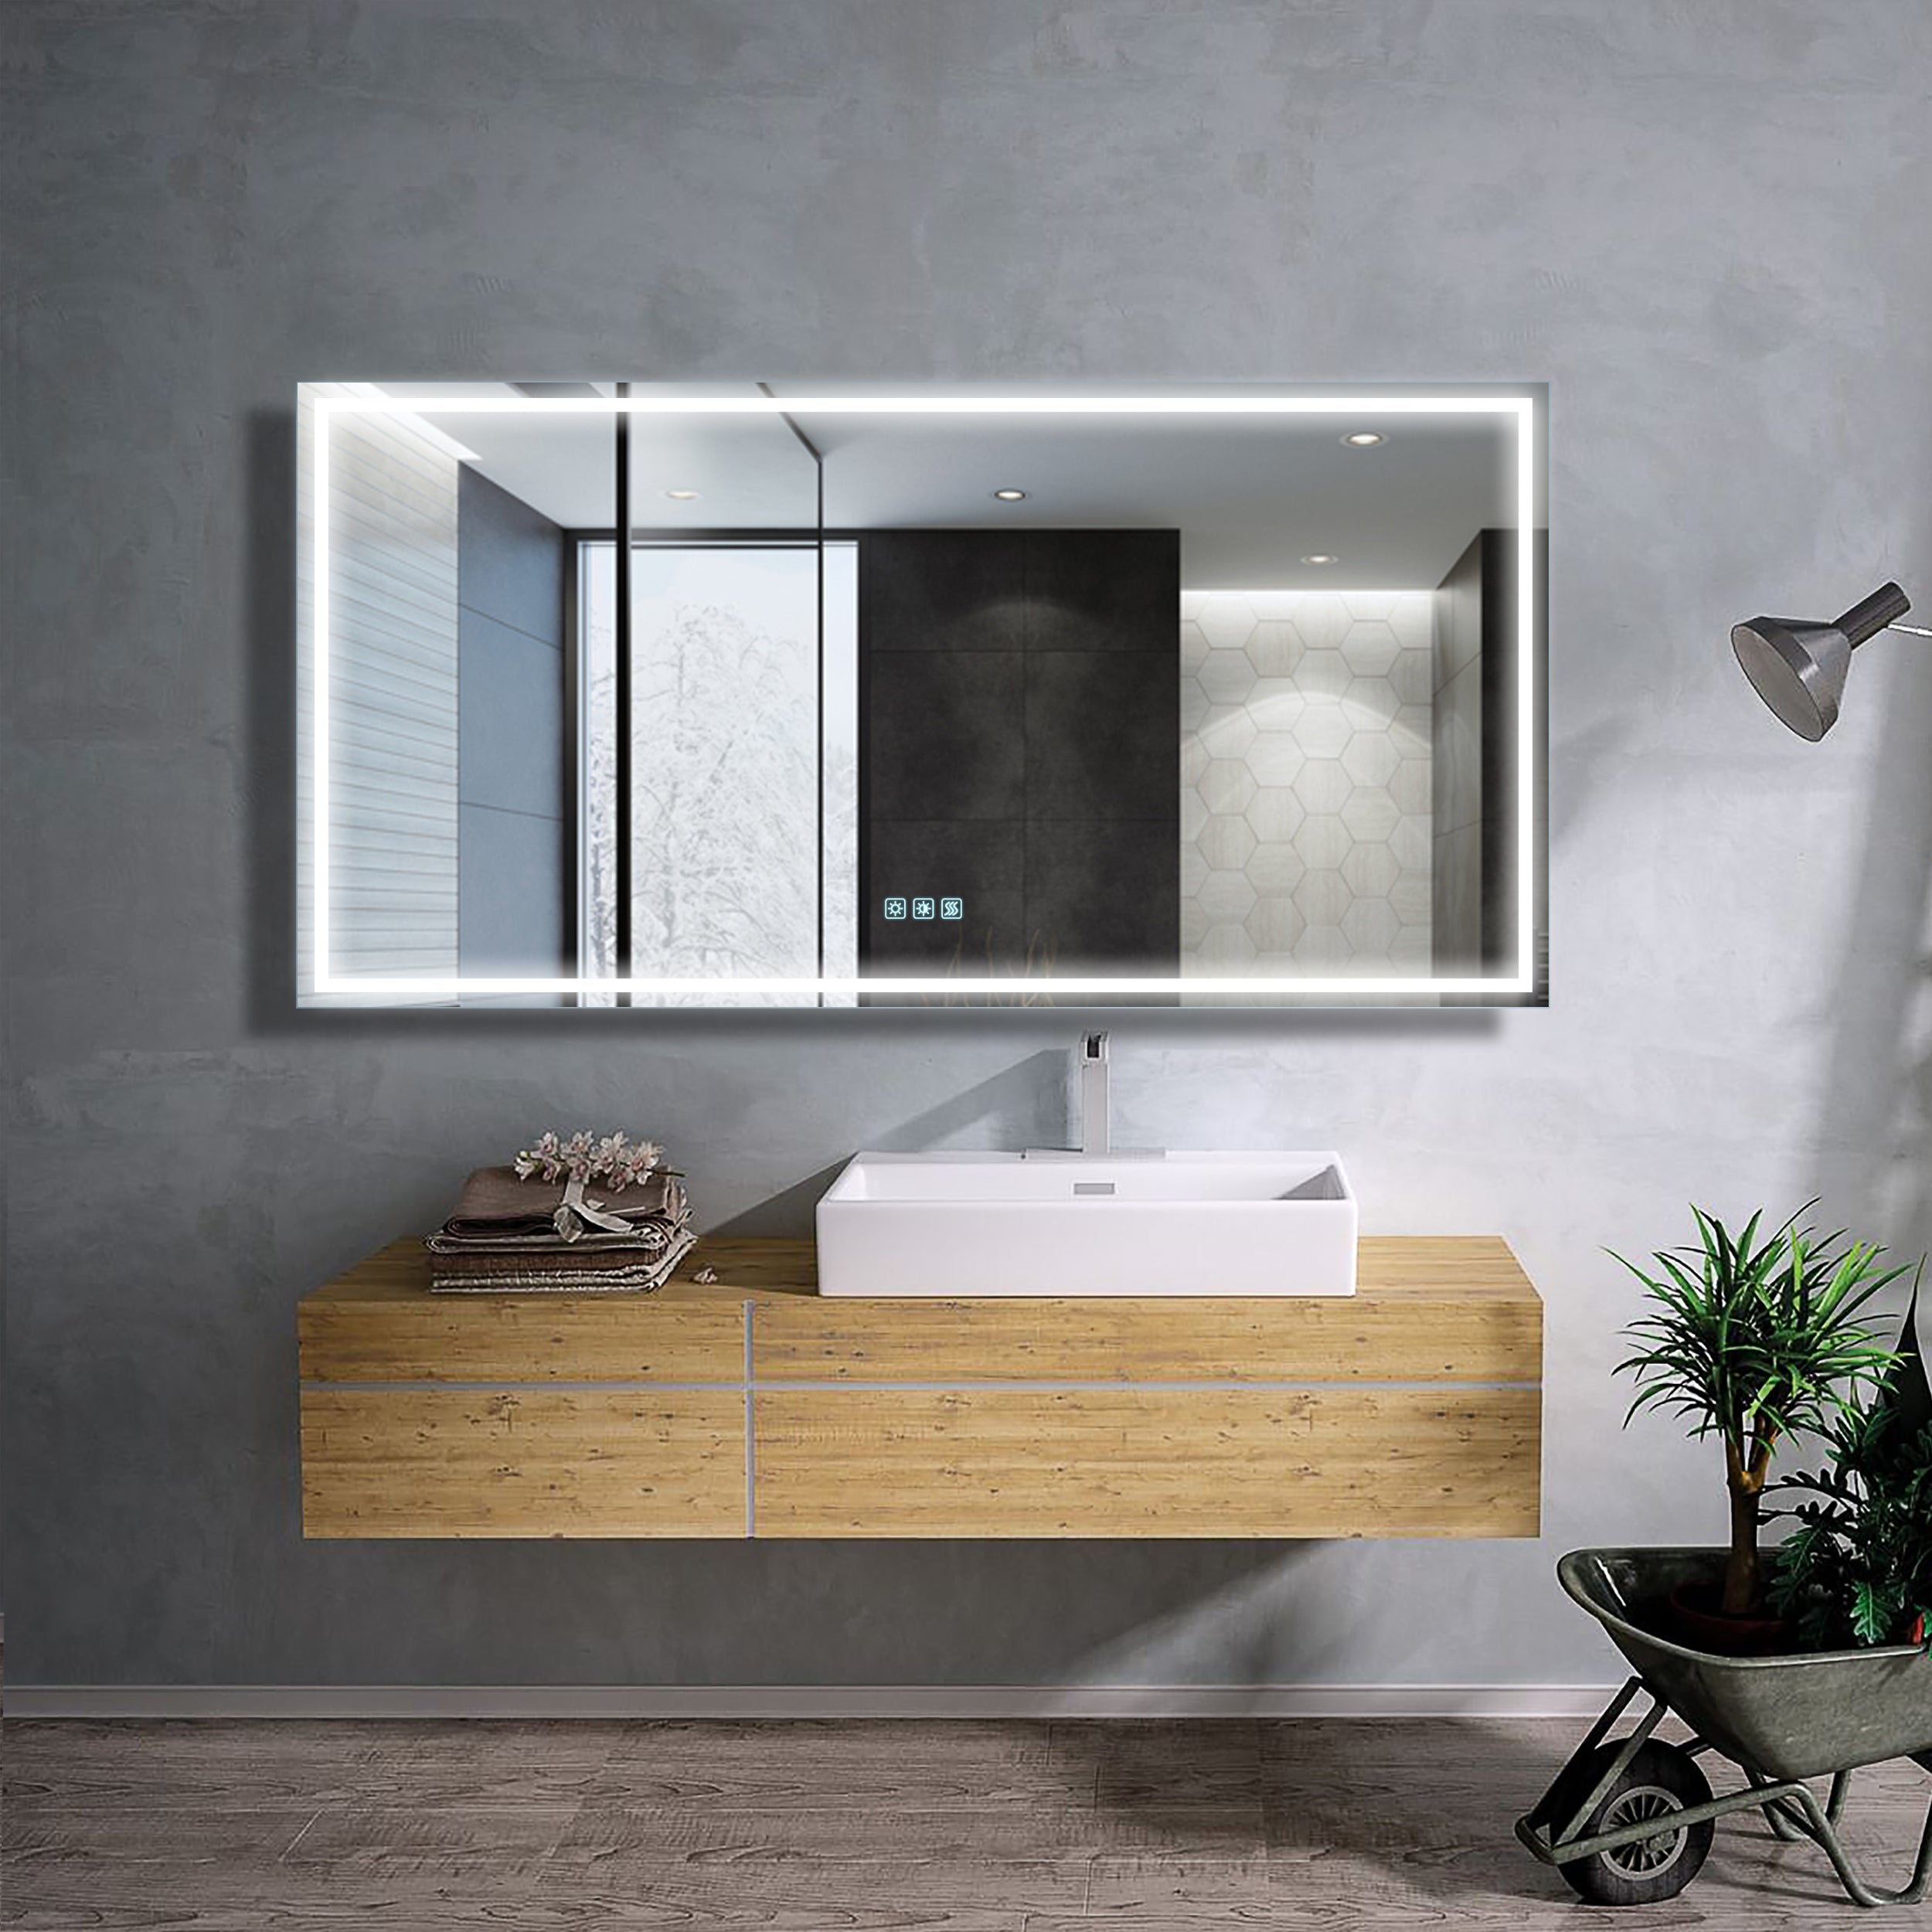 Details about   36"x 28" LED Bathroom Mirror Antifog Makeup Mirror Illuminated Wall Touch Sensor 